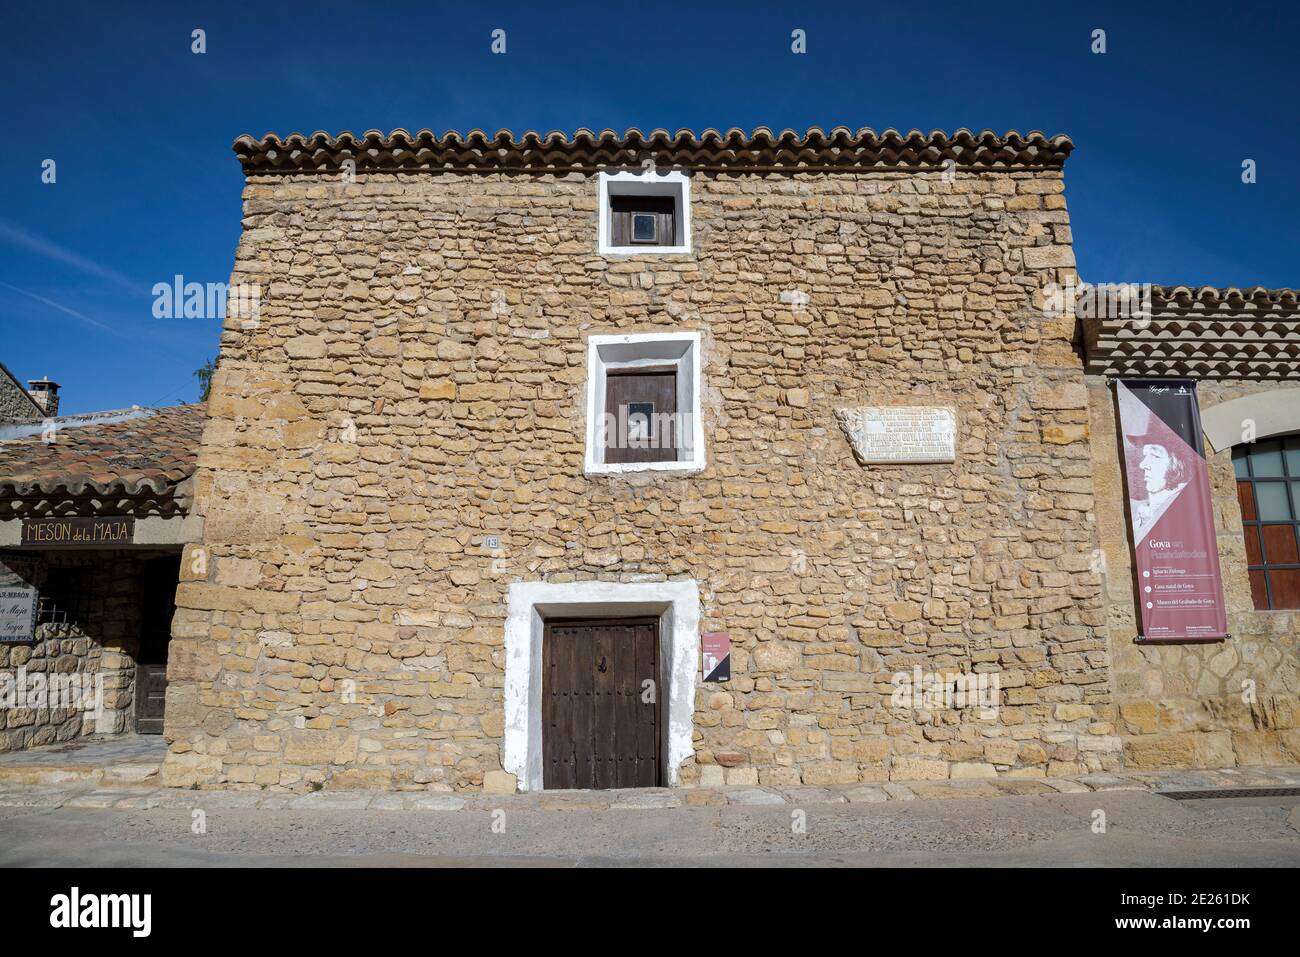 FUENDETODOS, SPAIN - NOVEMBER 18, 2017: Francisco de Goya birthplace. It is located in the village of Fuendetodos, province of Zaragoza, and was built Stock Photo